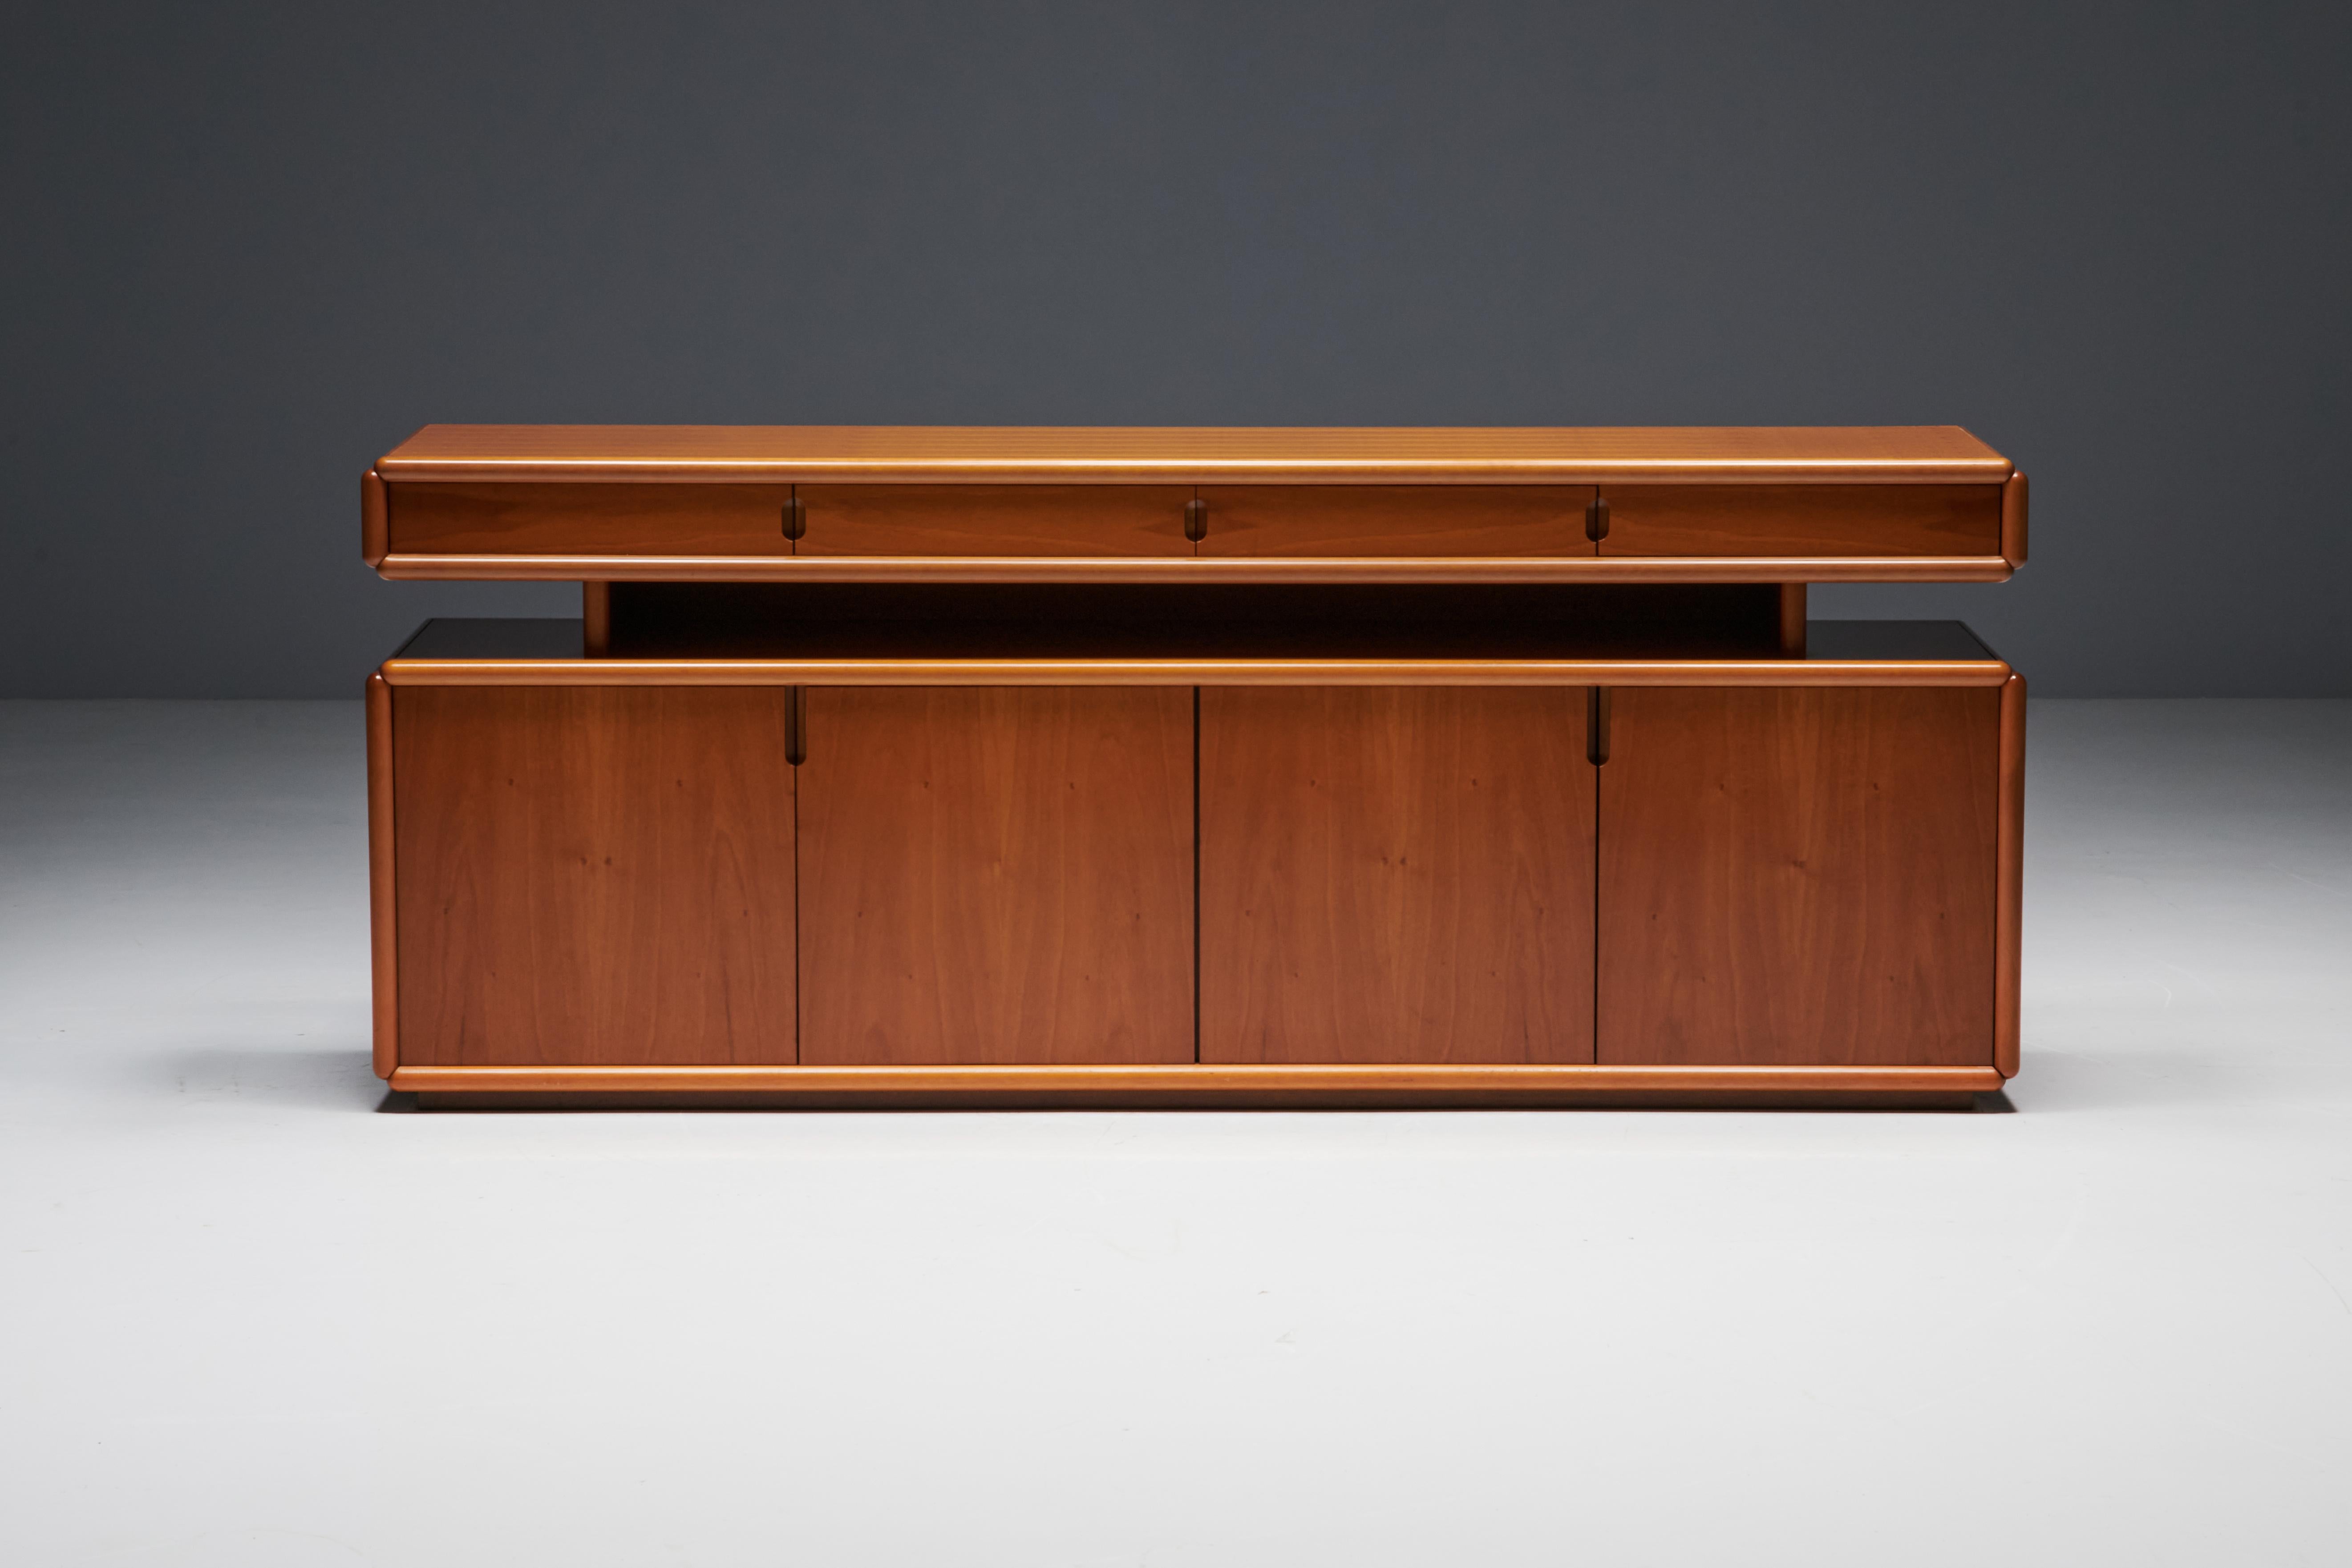 Postmodern Italian sideboard crafted from canaletto walnut and designed in the style of Mario Marenco. In addition to the enchanting beauty of the canaletto walnut patterns, this stunning piece offers ample storage space. The lower section has